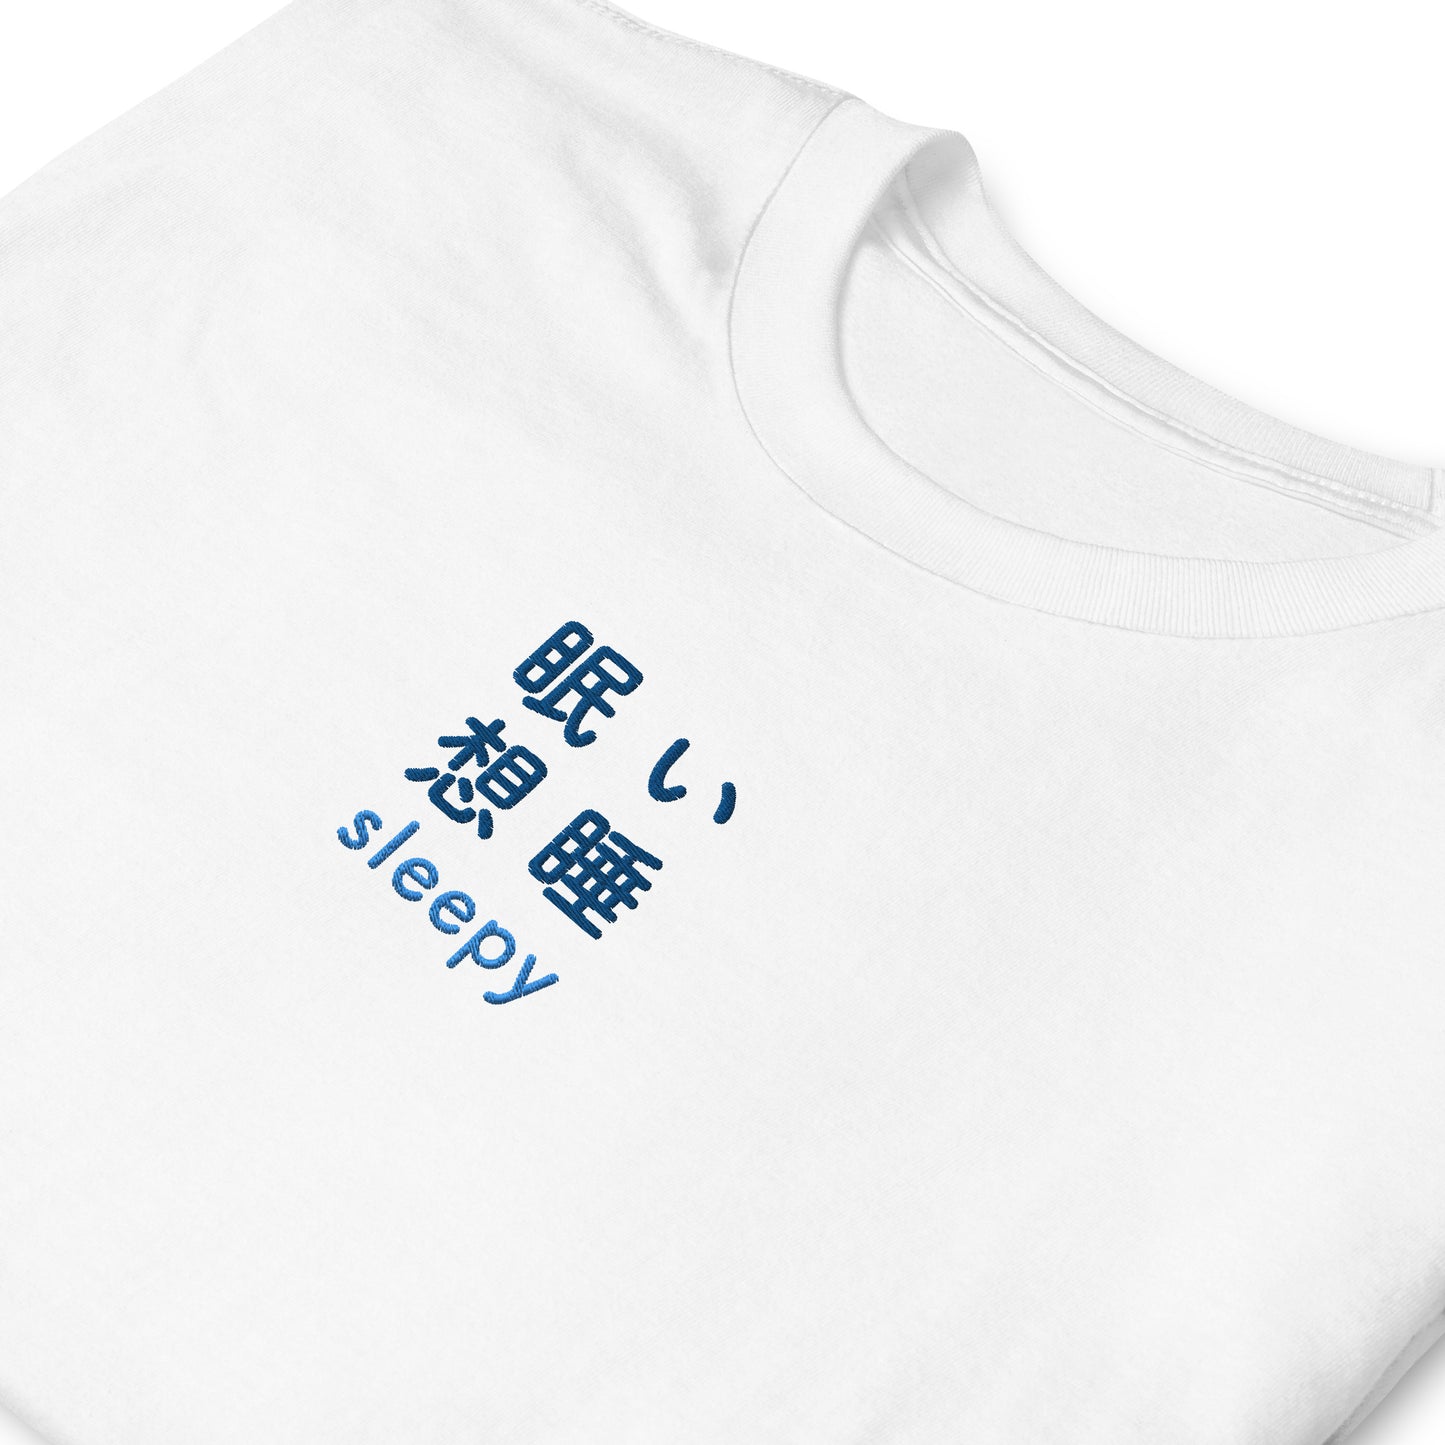 White High Quality Tee - Front Design with an Blue Embroidery "Sleepy" in Japanese,Chinese and English